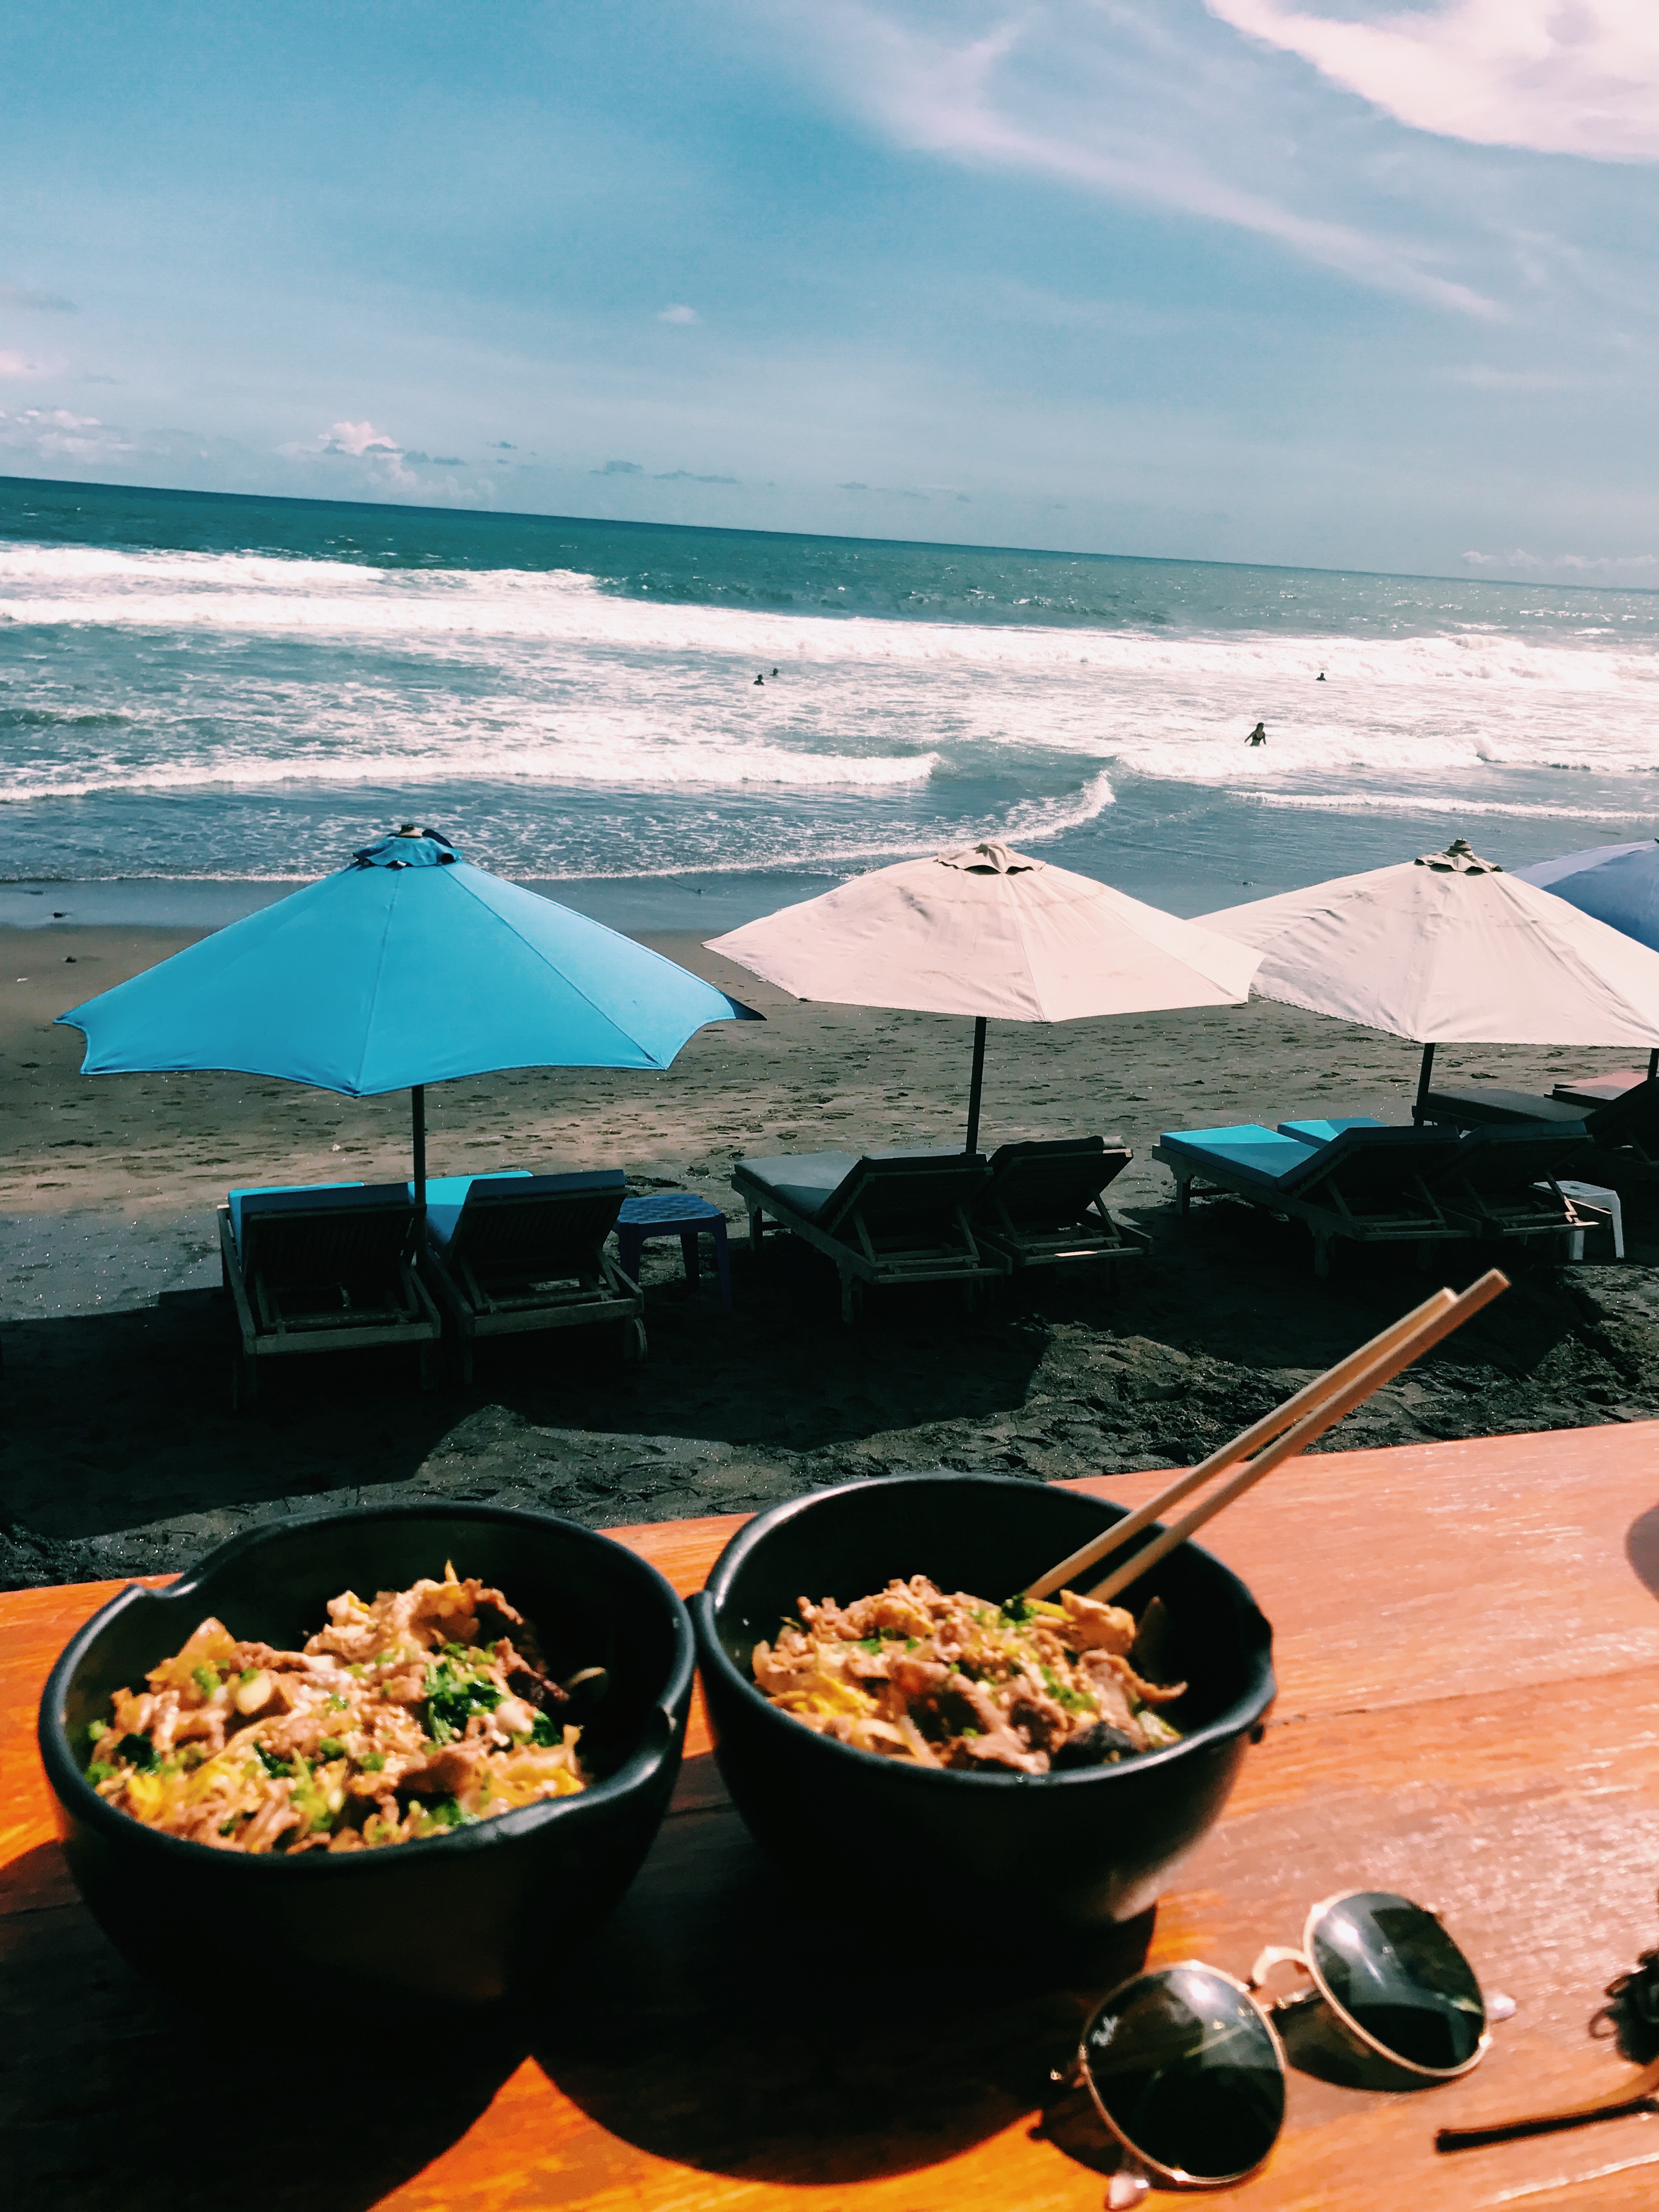 In this blog post, we’re breaking down all our favorite foodie spots in Canggu, Bali: for must-try brekkie spots, lunch hideouts and delicious dinner spots. Get ready for a major eye feast! And warning: do not proceed on an empty stomach.